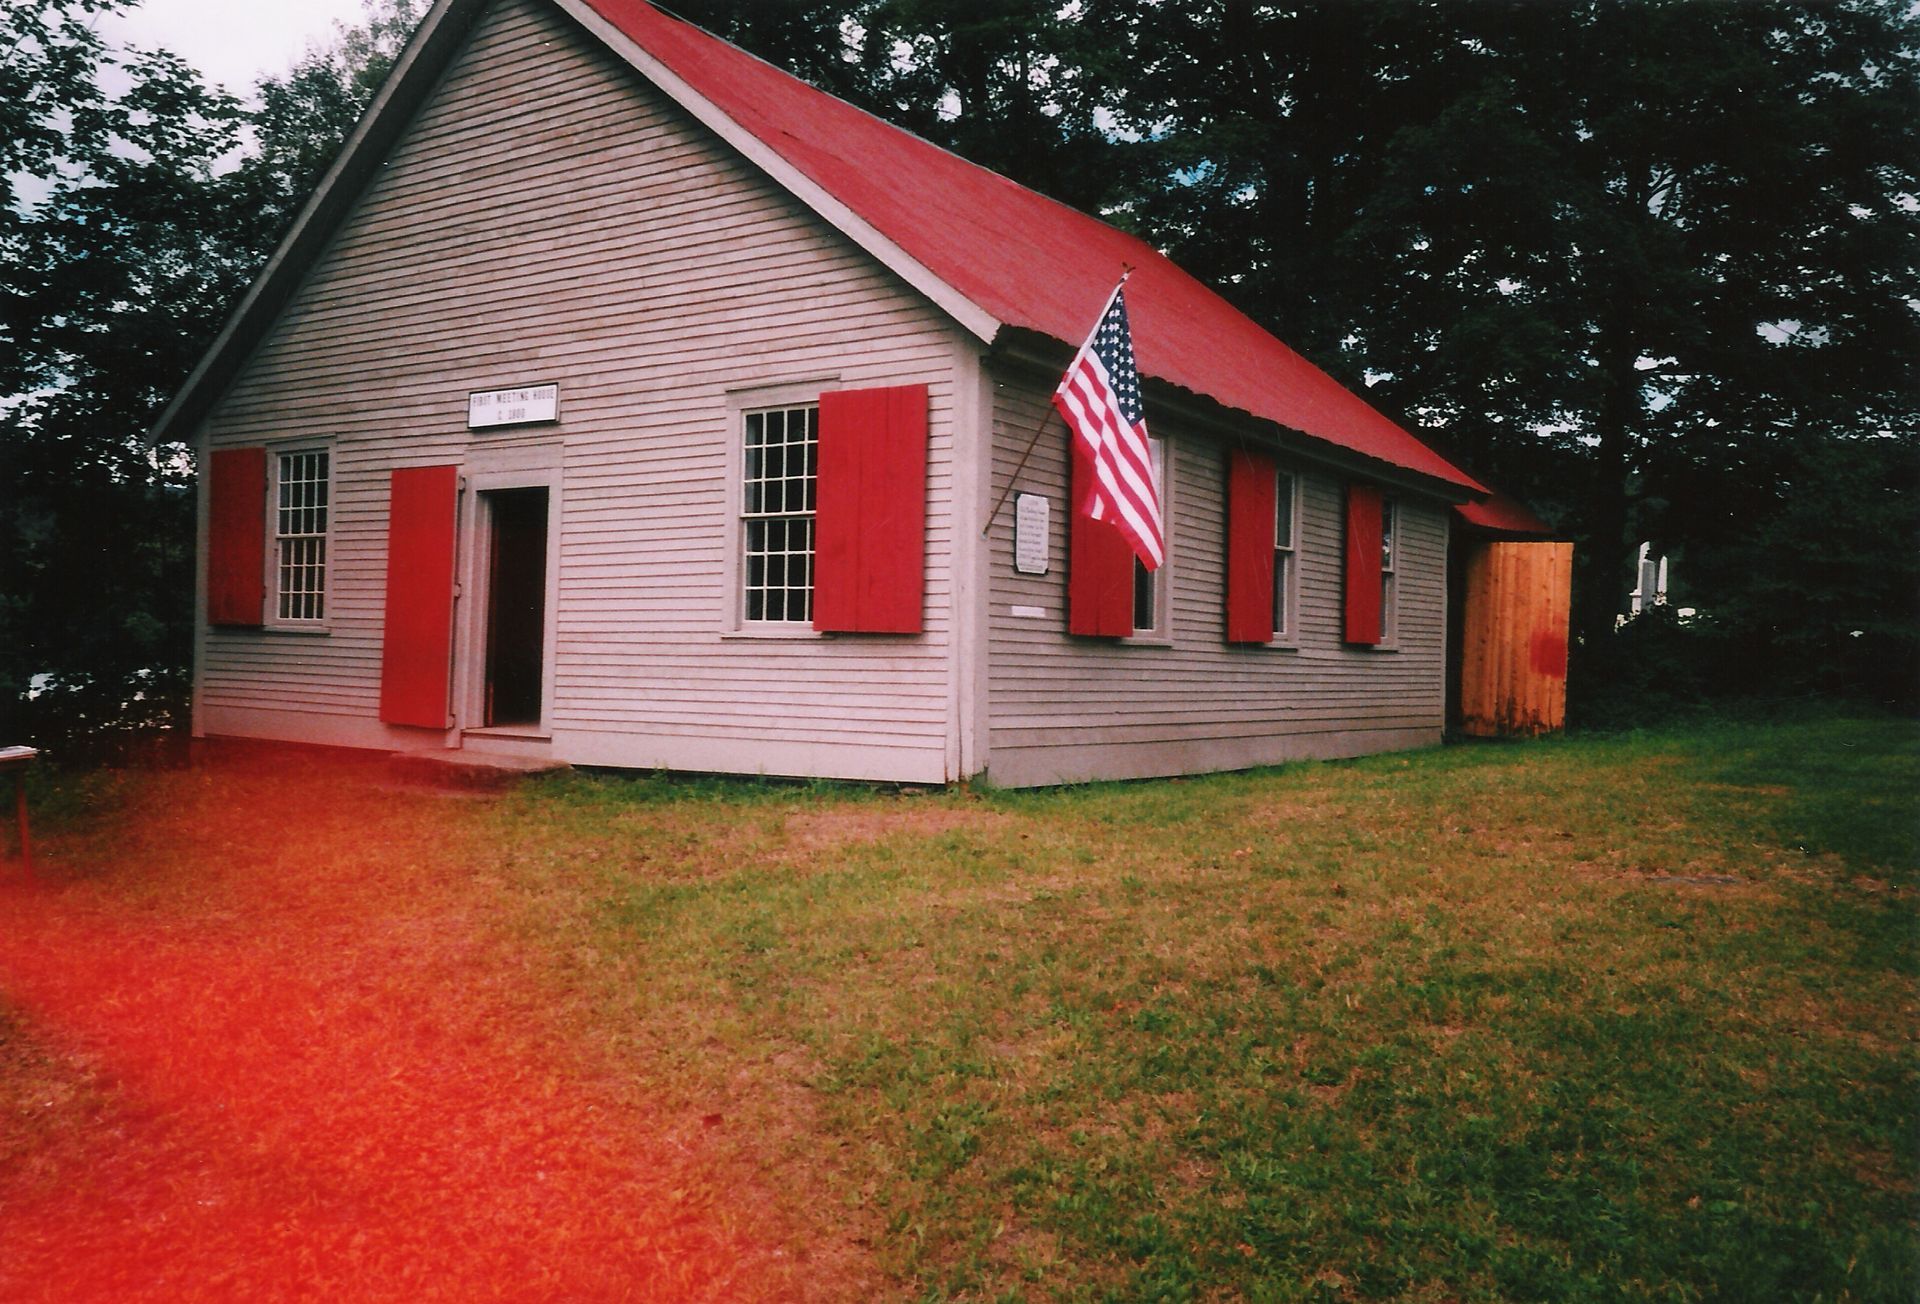 Sheffield first meeting house on colored film.